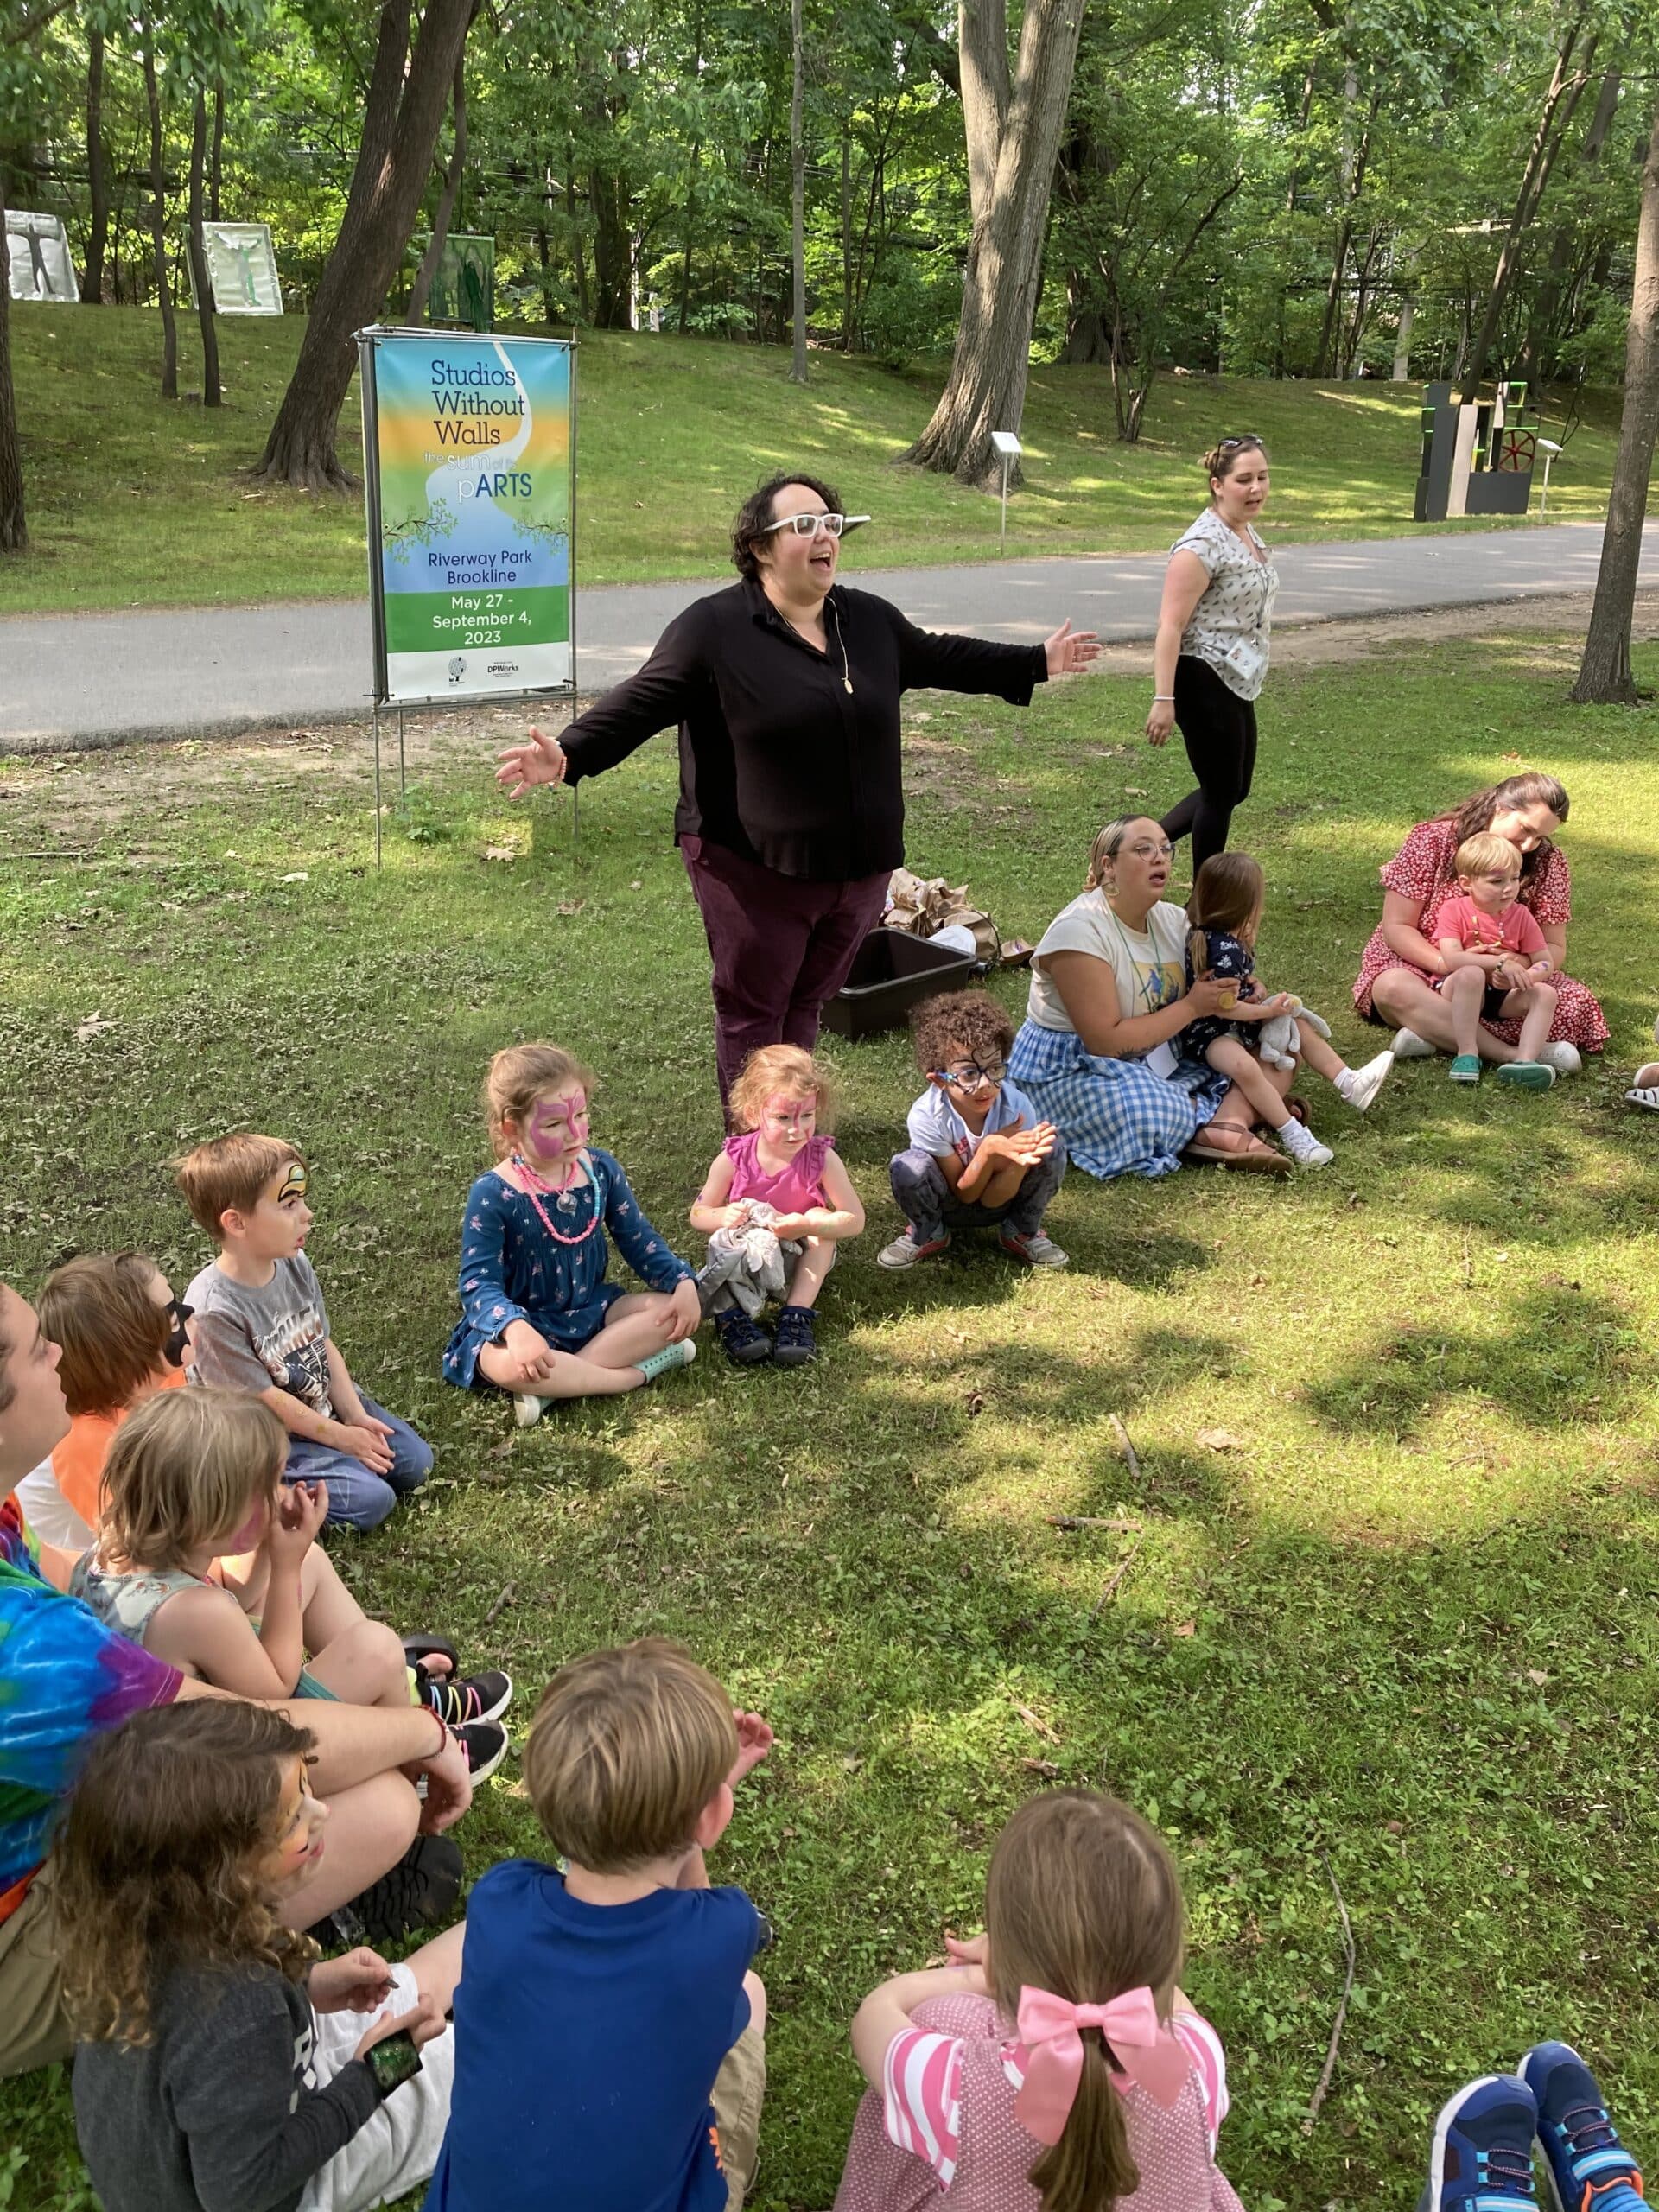 Rabbi Suzie Jacobson standing with arms outstretched beside a group of children sitting in the park